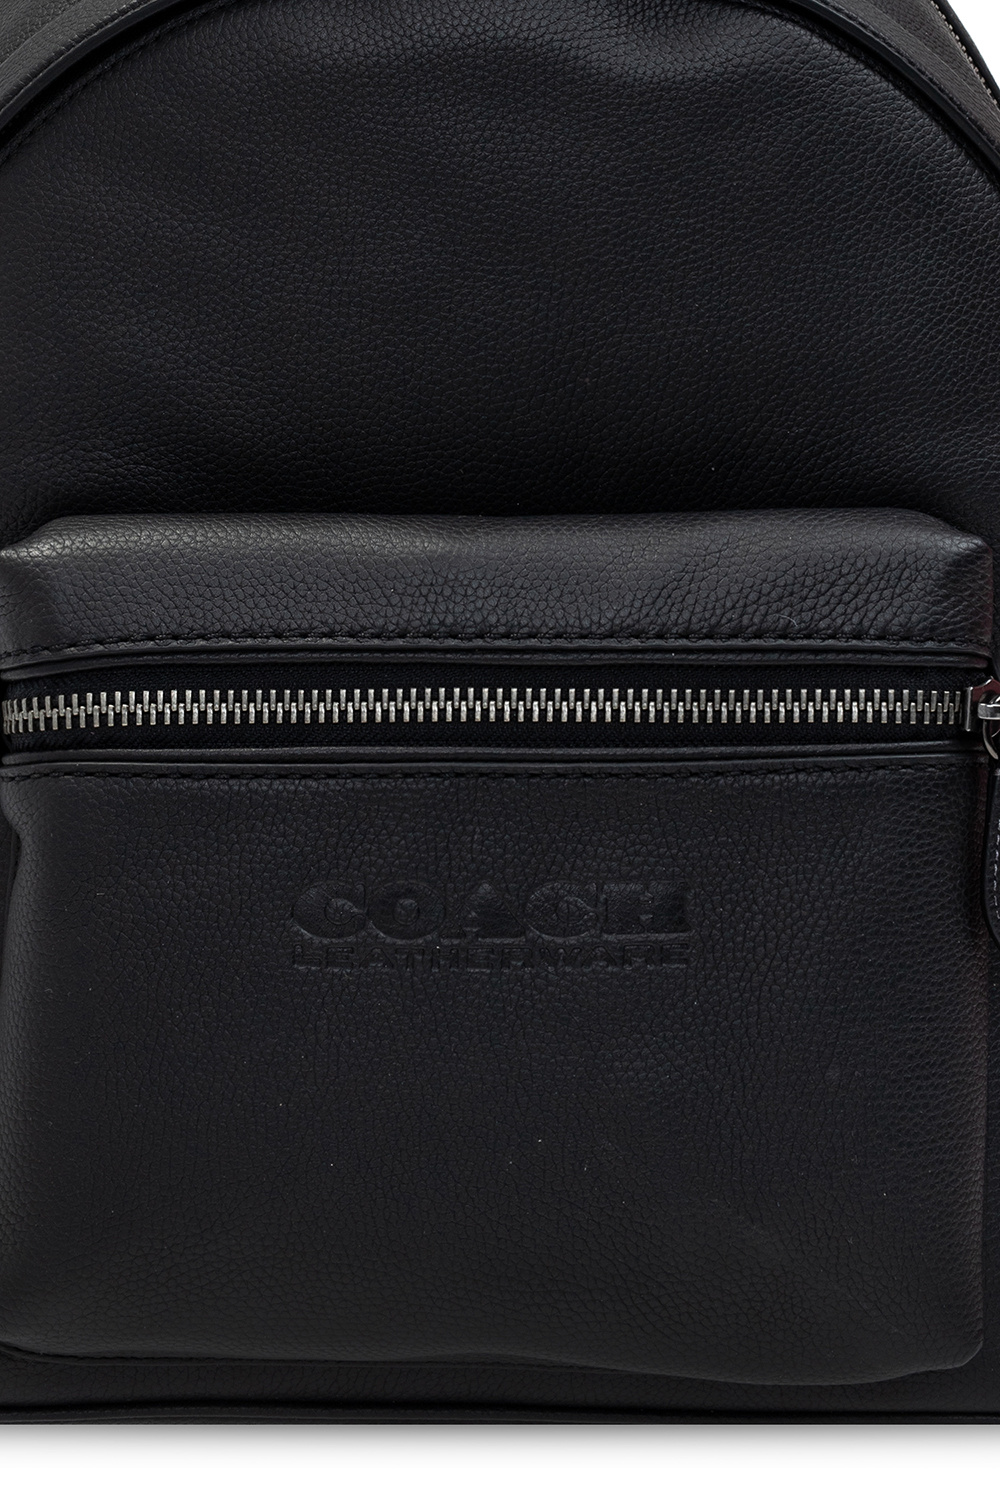 Coach 'Charter' Aboutpack with logo